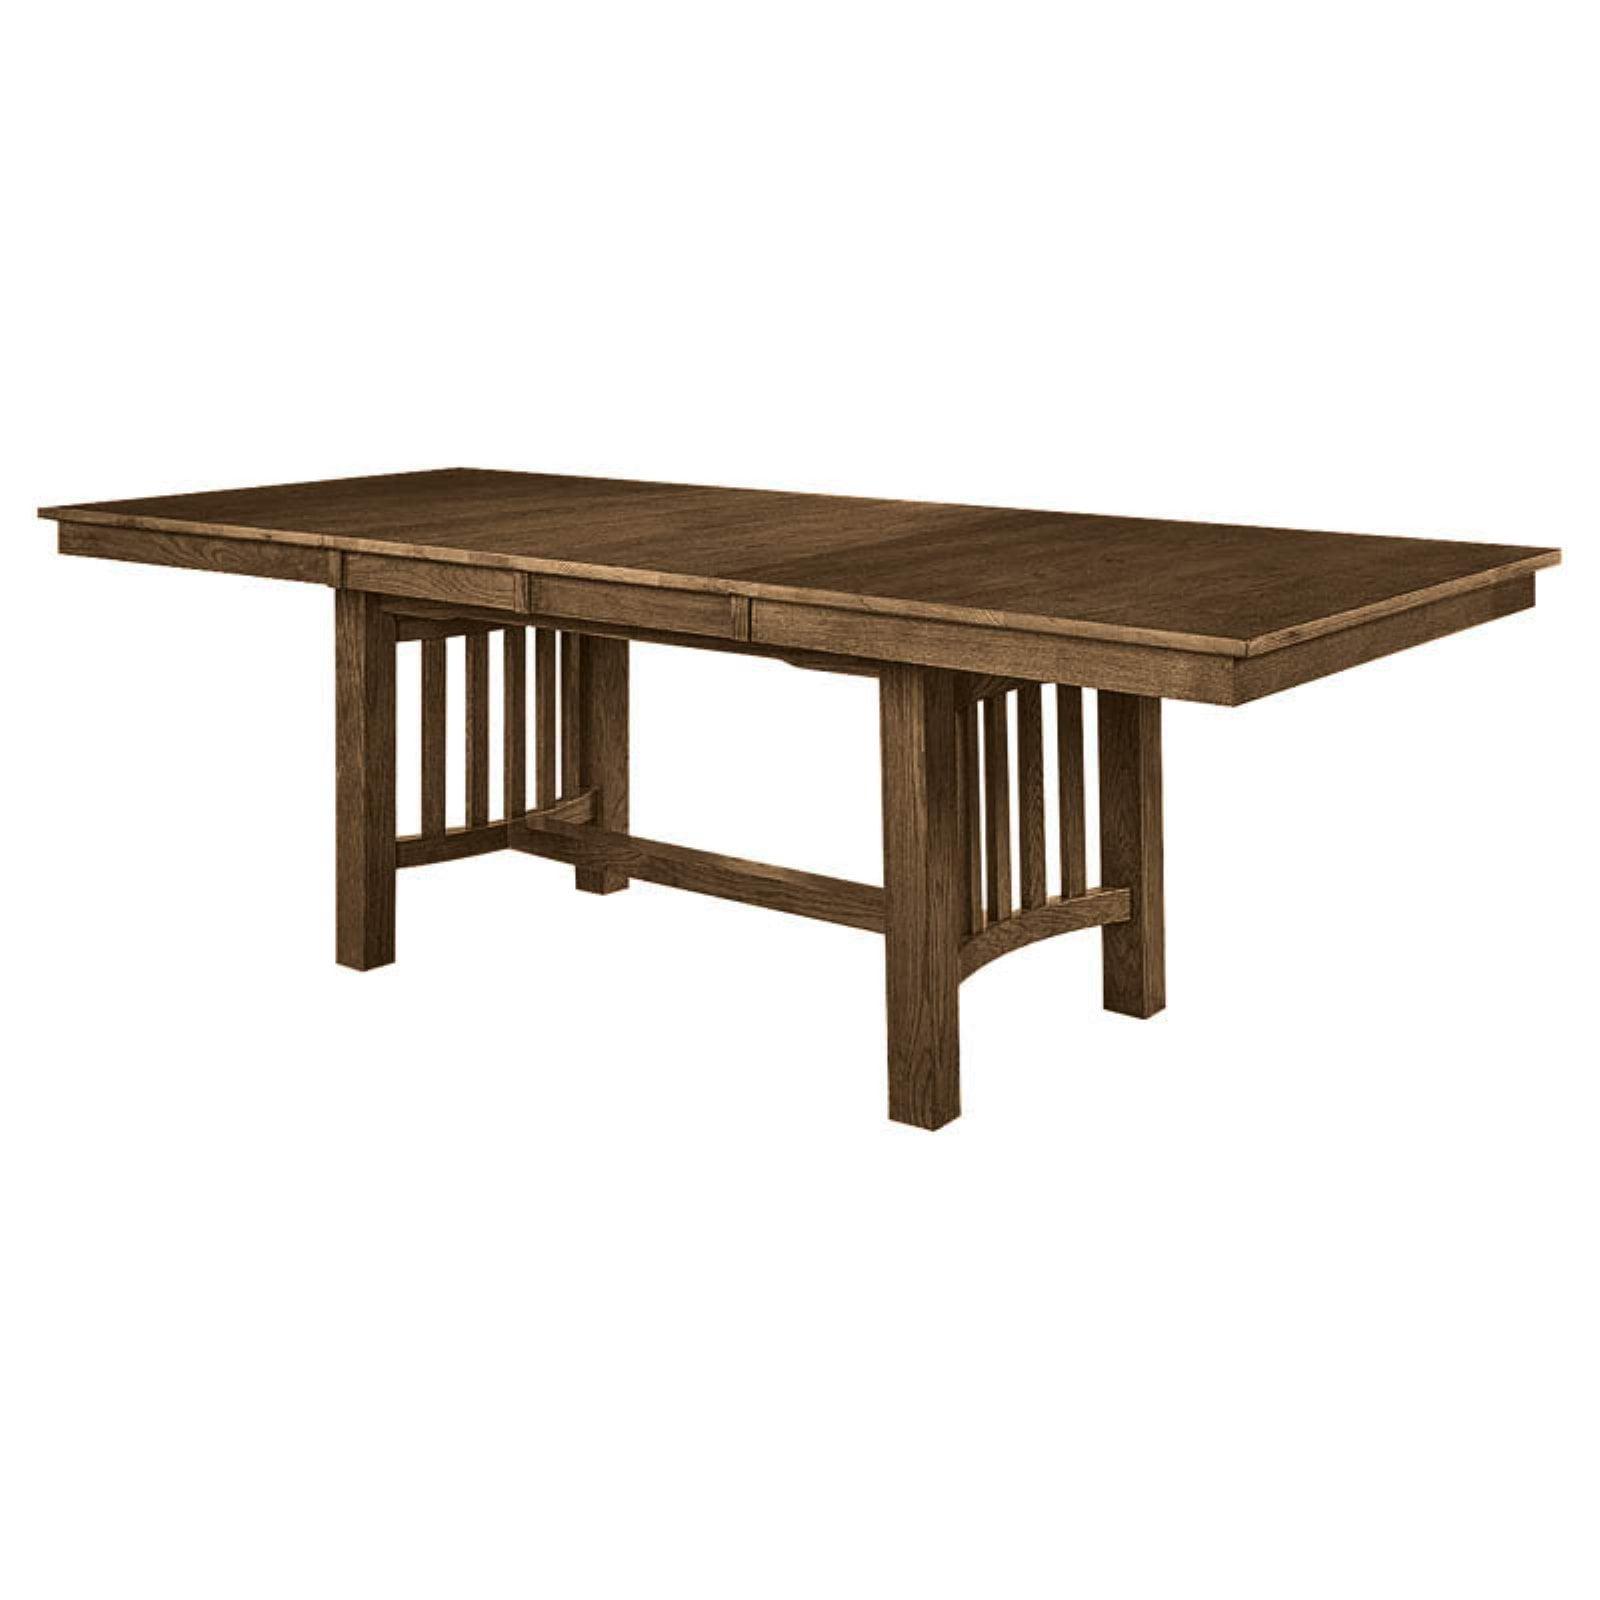 Transitional Rustic Oak Extendable Dining Table with Self-Storing Leaves